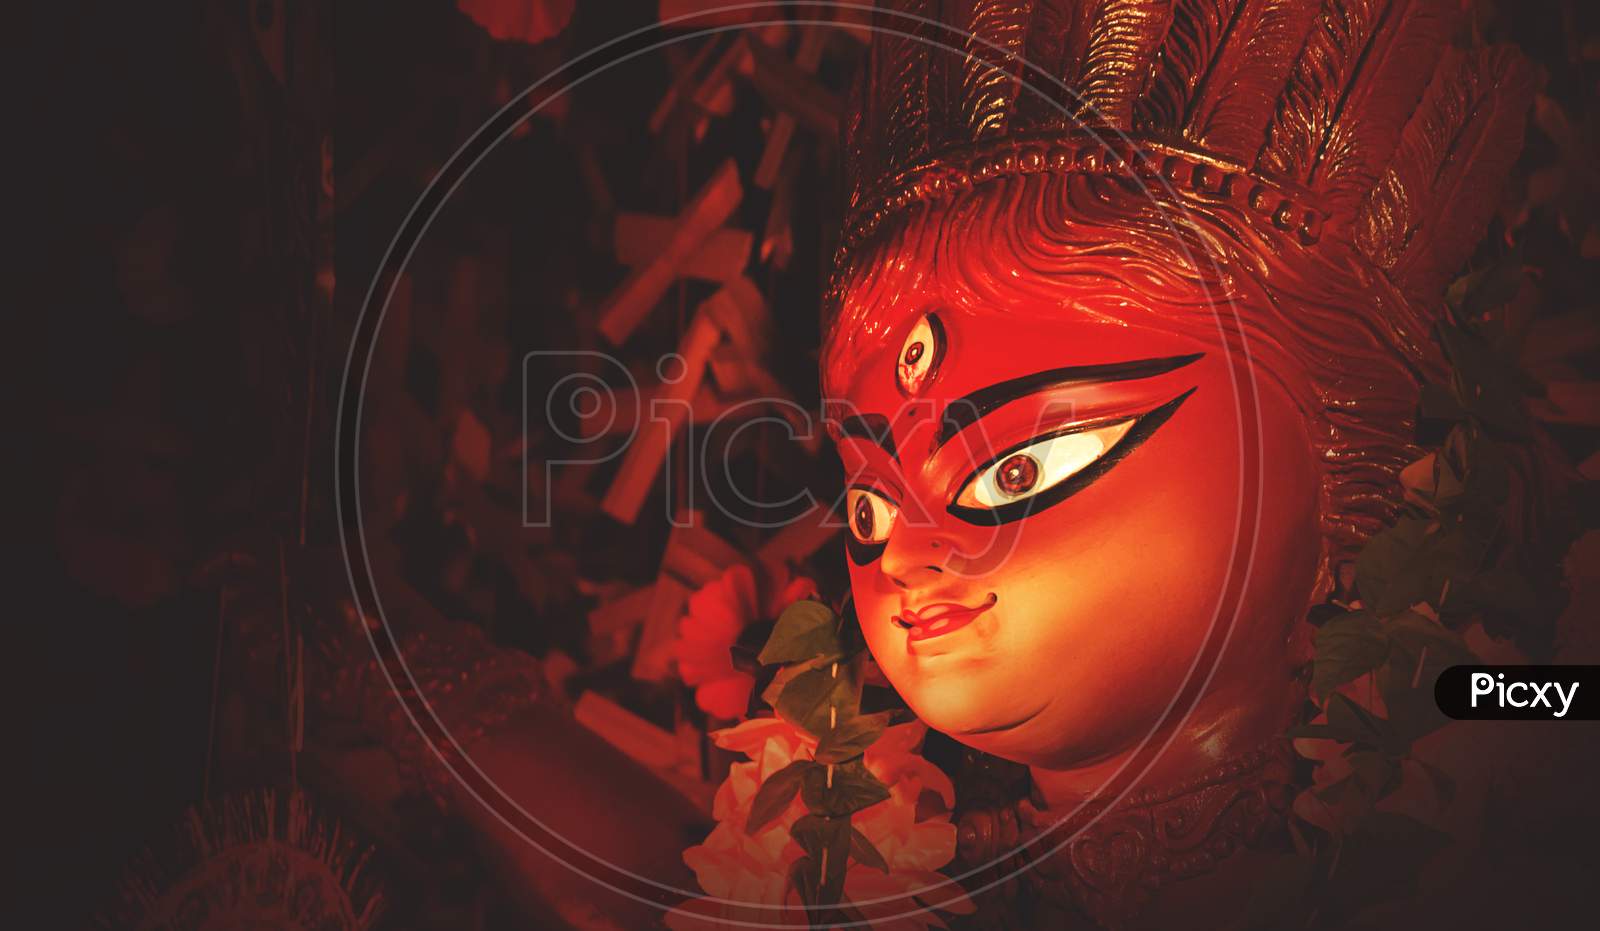 Godess Durga Idol In A Pandal.Durga Puja Is The Most Important Worldwide Hindu Festival For Bengali